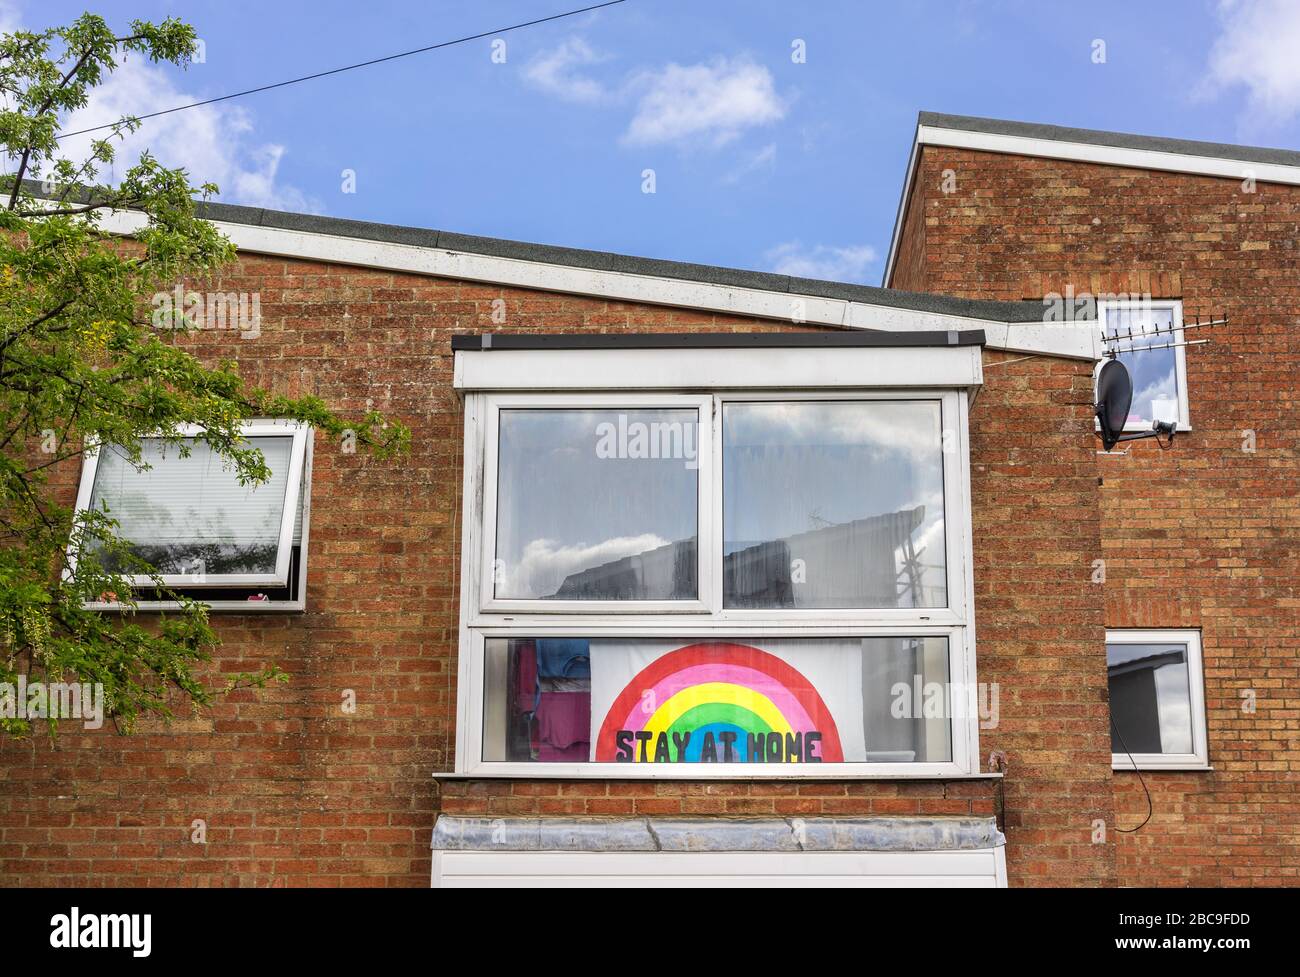 Sign with a 'Stay at home message' and a rainbow displayed in a window at the height of the coronavirus pandemic of 2020 at Southampton, England, UK Stock Photo